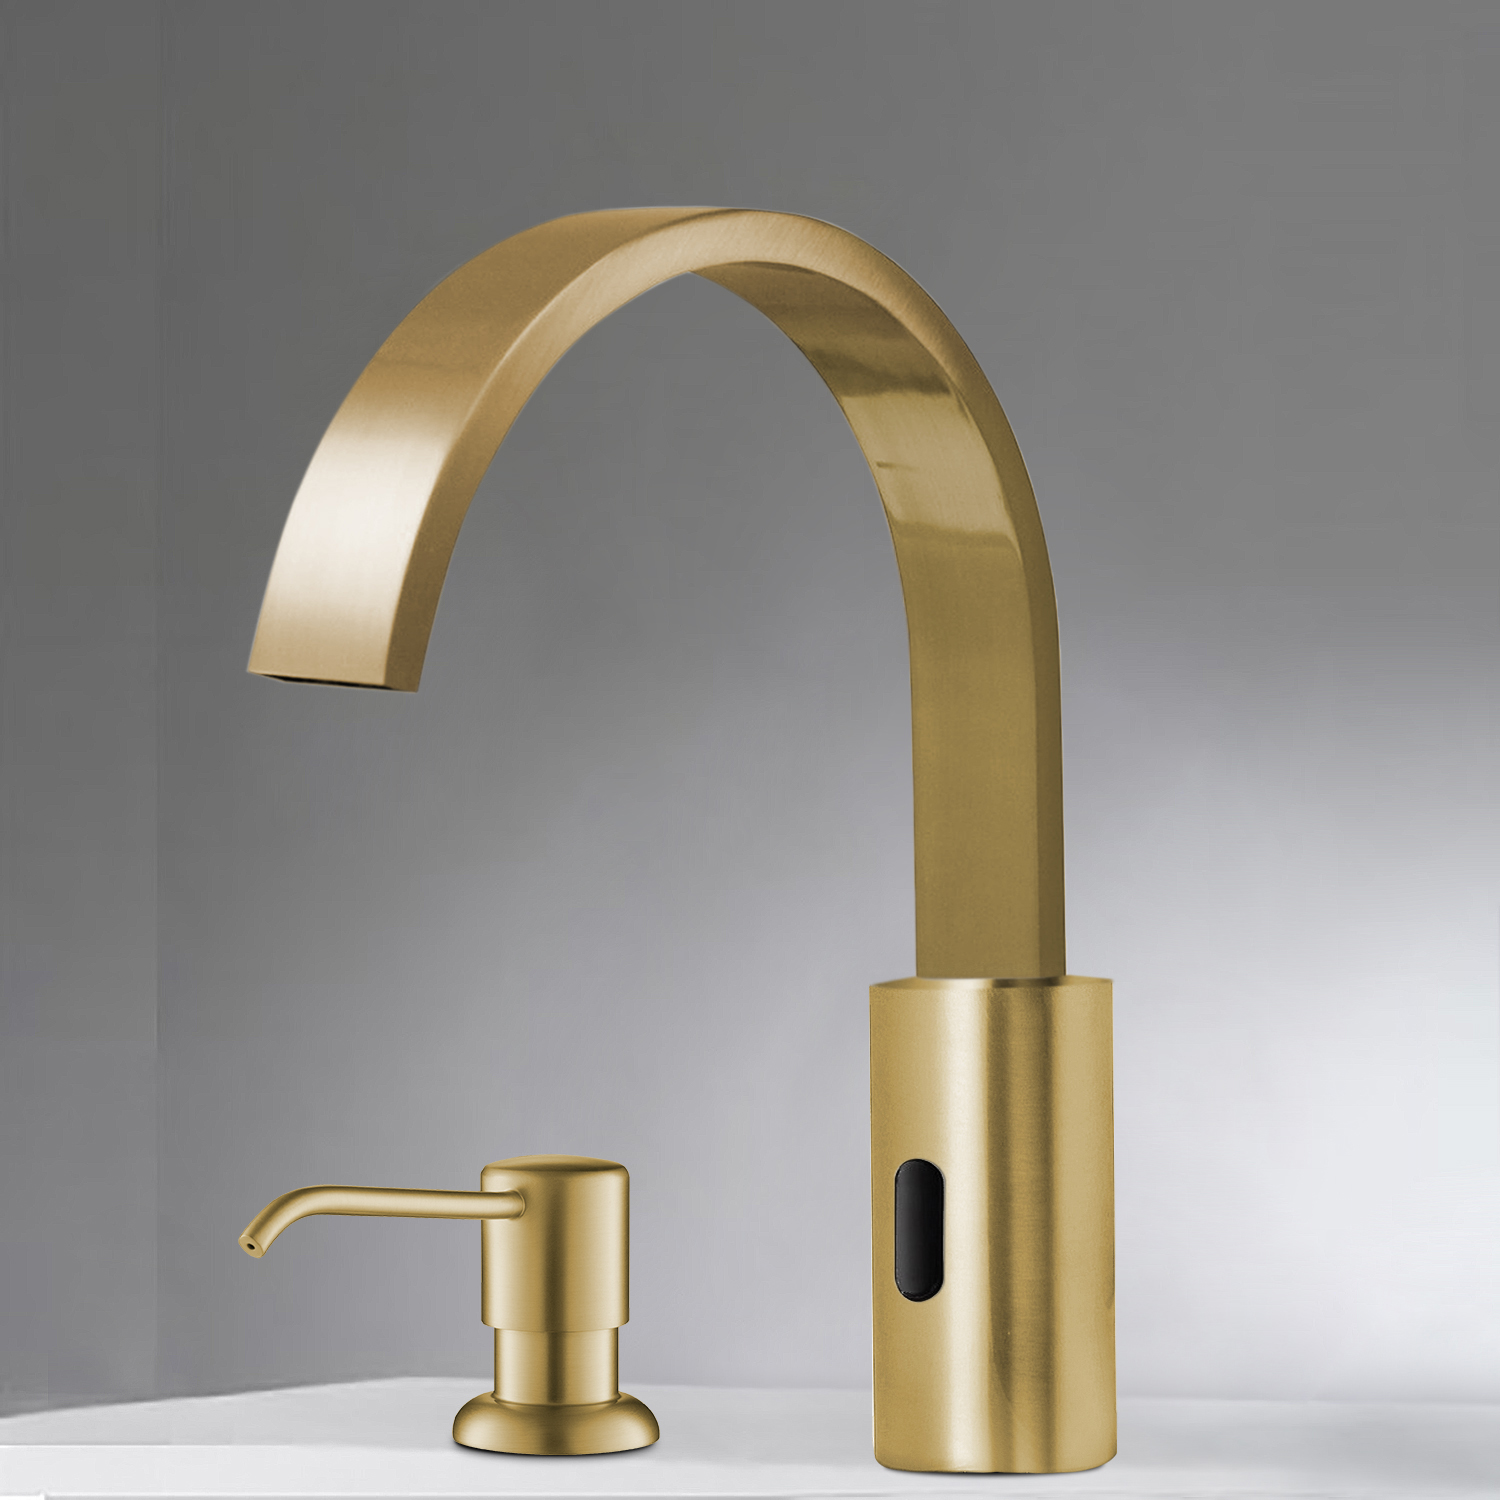 Bravat Brushed Gold Infrared Automatic Electronic Commercial Faucet With Manual Soap Dispenser